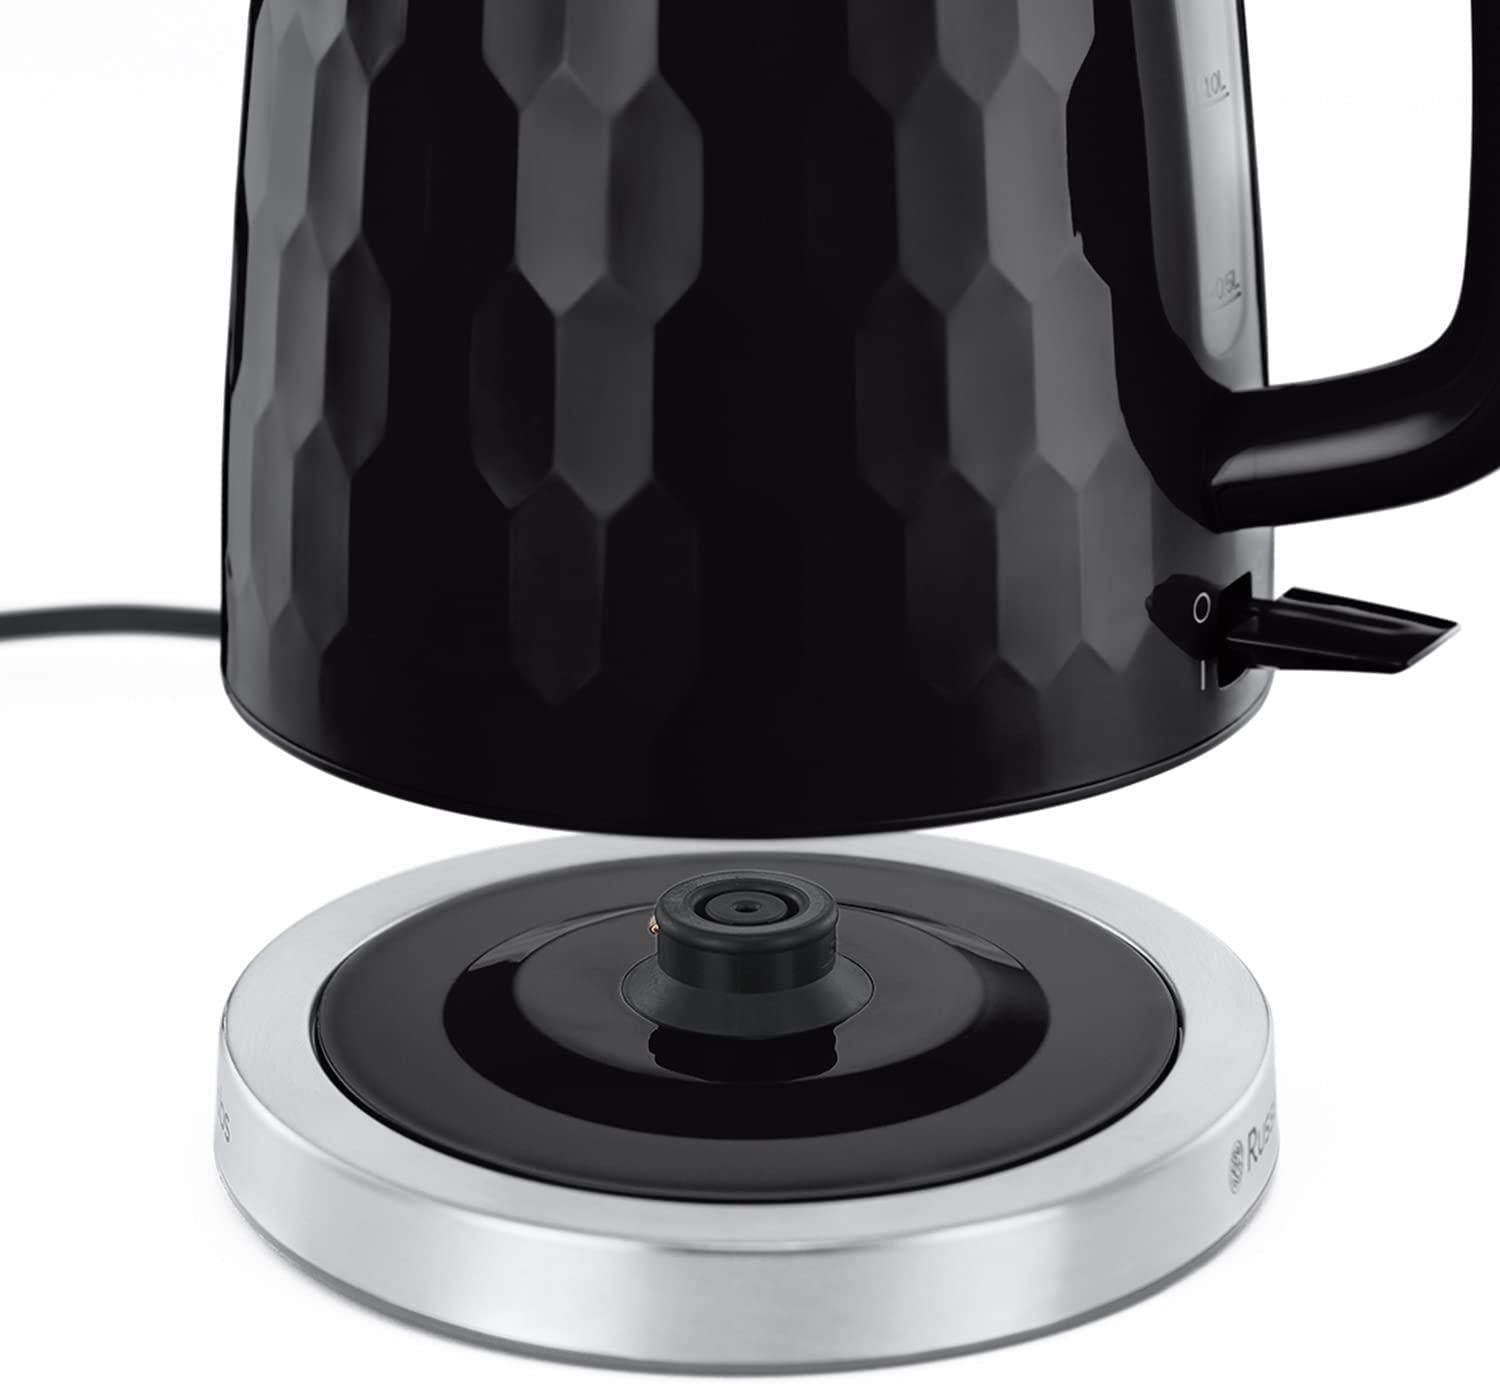 Russell Hobbs Kettle Honeycomb Cordless Electric Jug Kettle Fast Boil Black - 26051